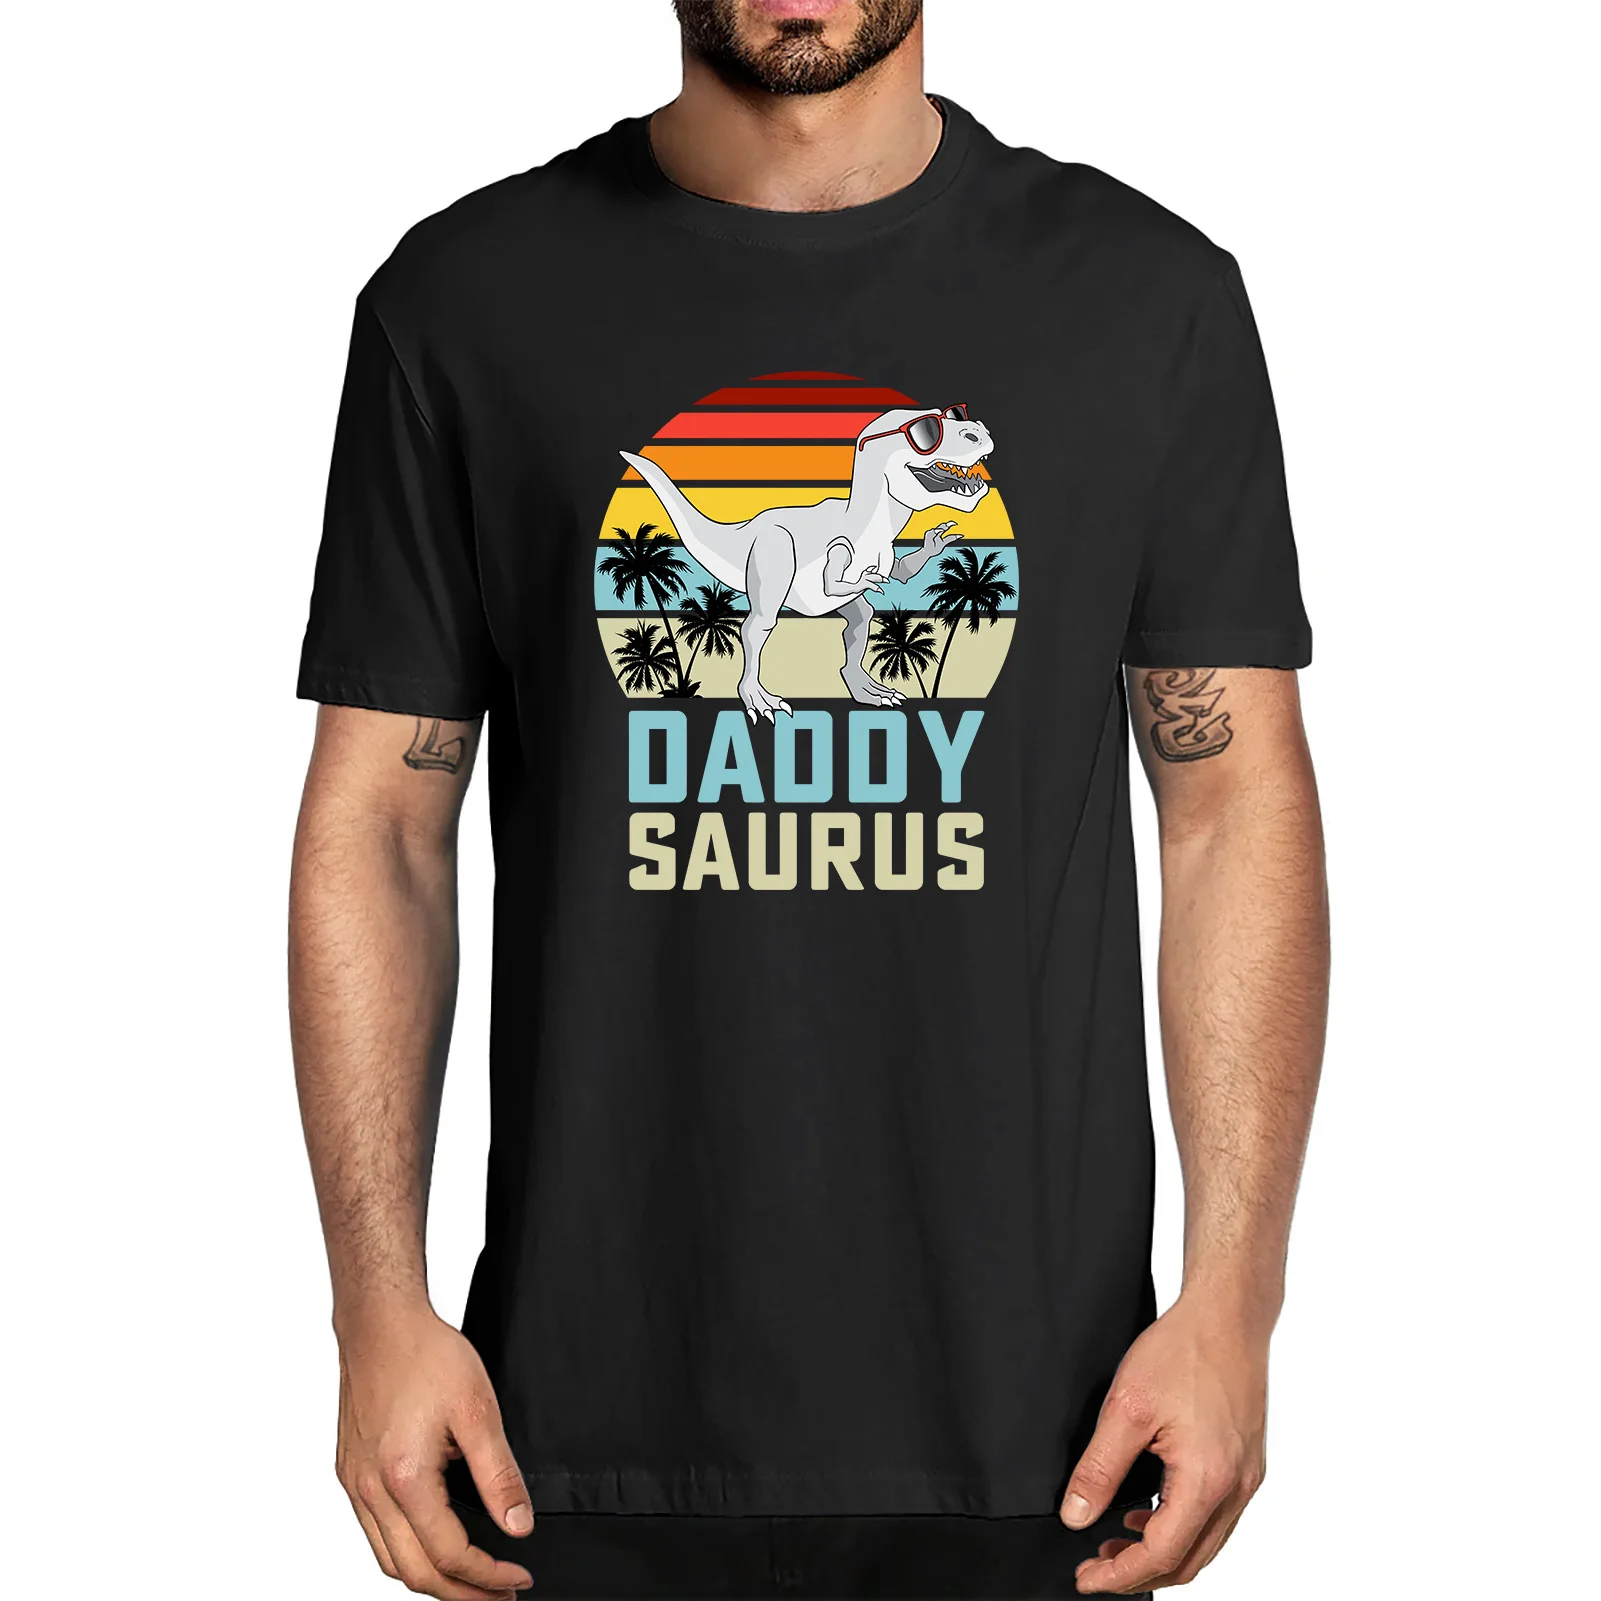 

Unisex Daddysaurus T Rex Dinosaur Daddy Saurus Family Matching Fathers Day Gifts Funny Tshirt Men's 100% Cotton Novelty T-Shirt